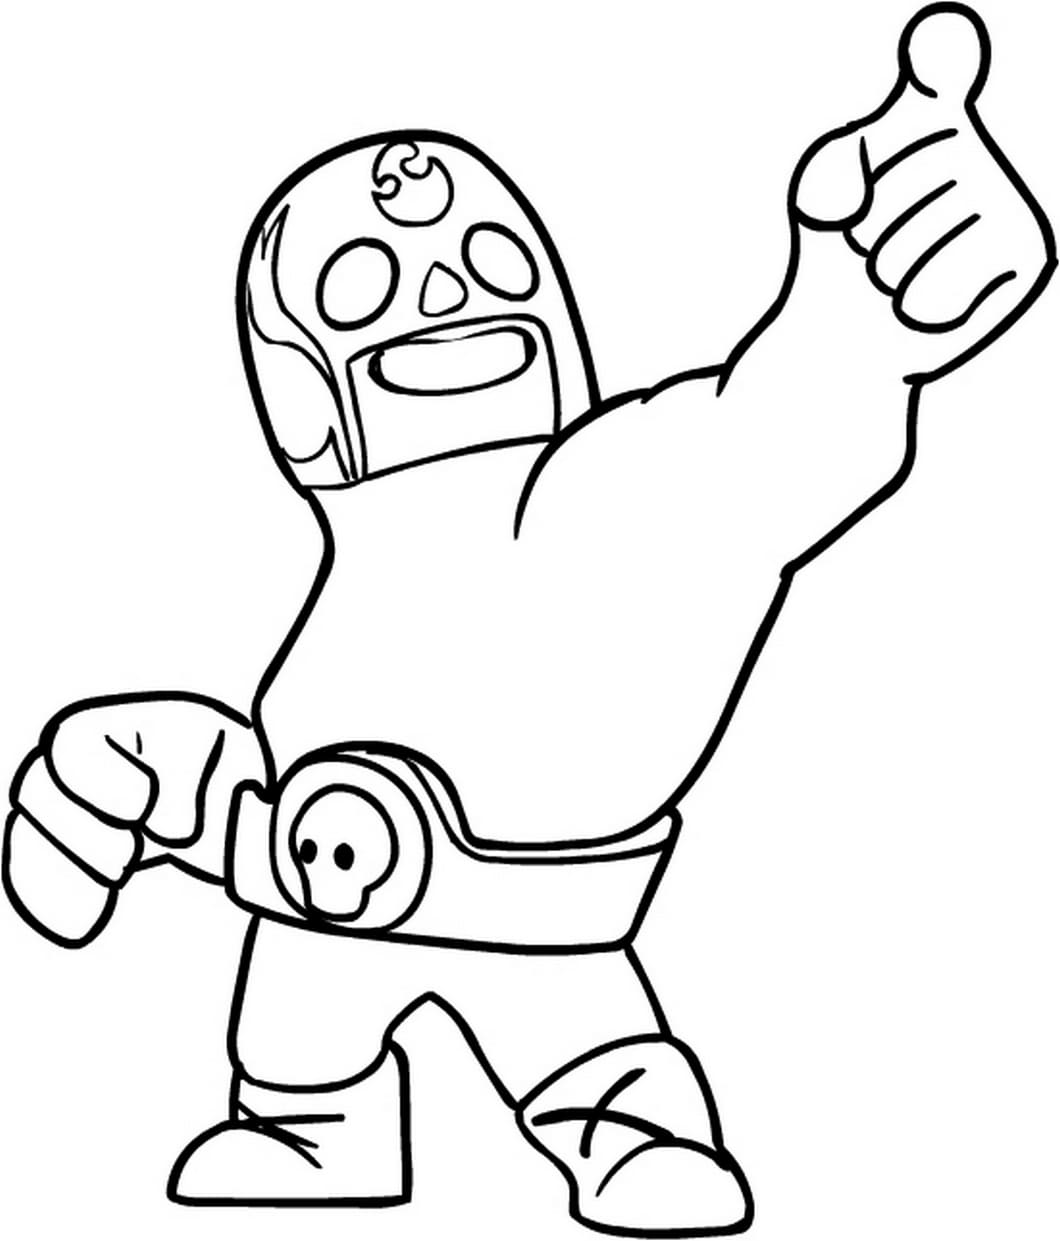 Brawl Stars Coloring Pages Coloring Home - stars brawl colorir